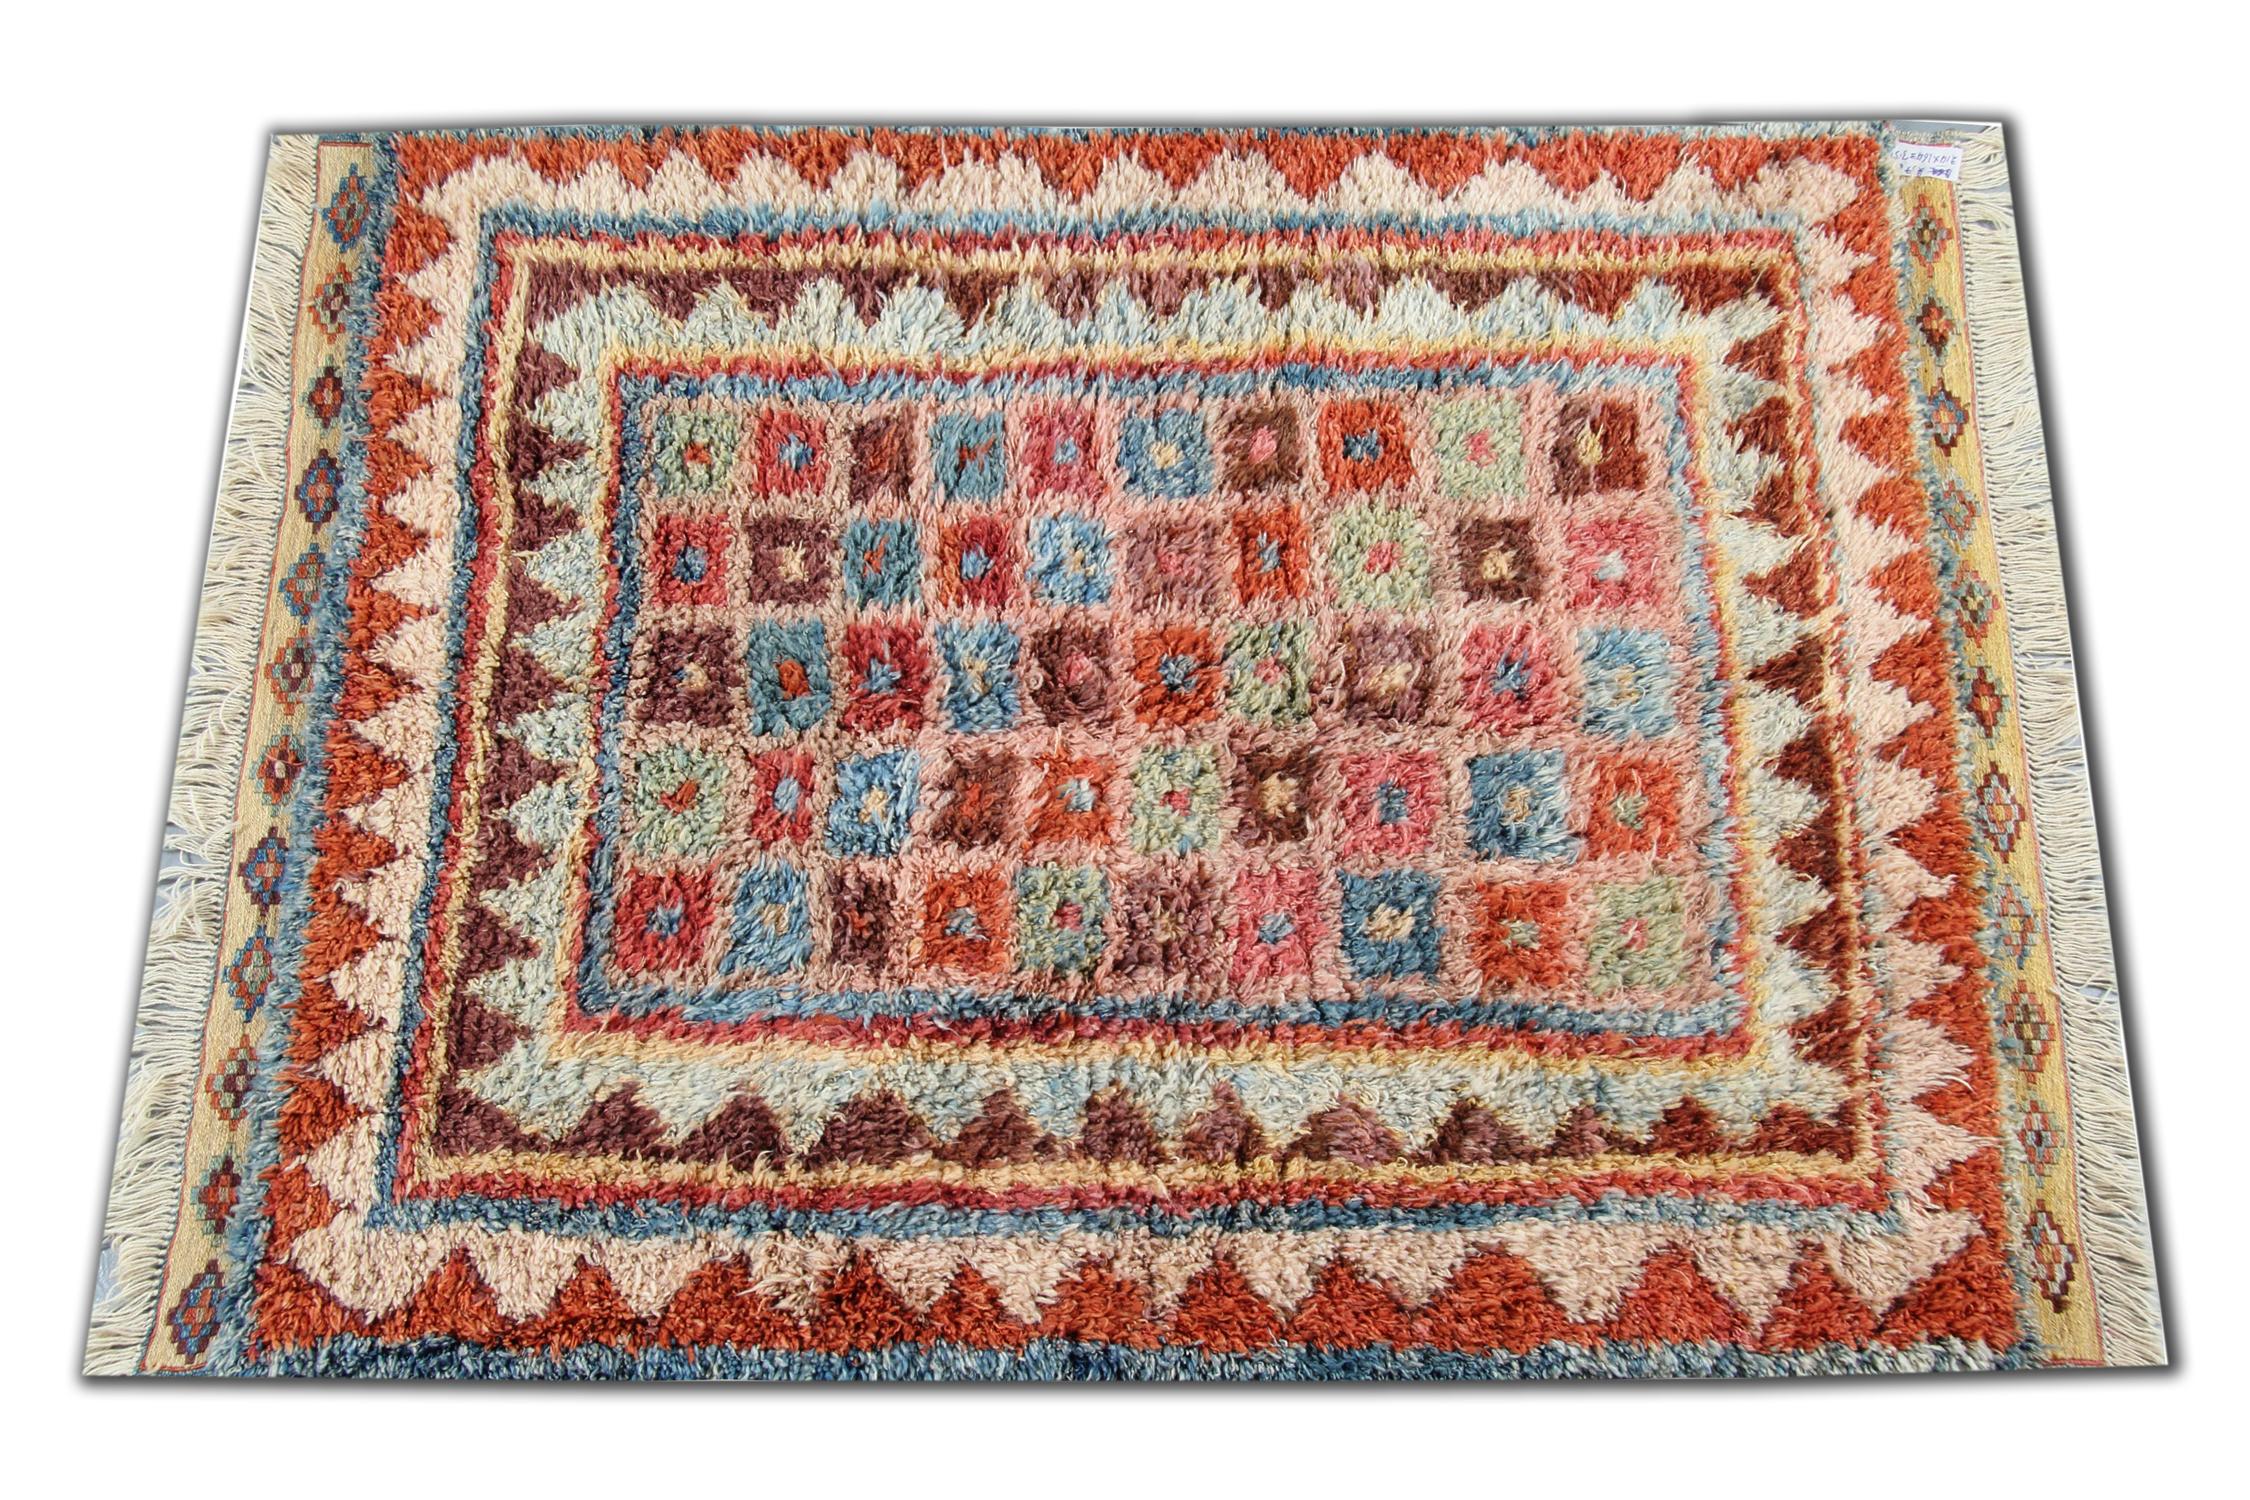 This handmade carpet is an example of a handwoven rug, which features designs from the Morocco region. Morocco is famous for its primitive traditional rugs with long piles. Weavers used top-quality wool and cotton for the production of this red rug.